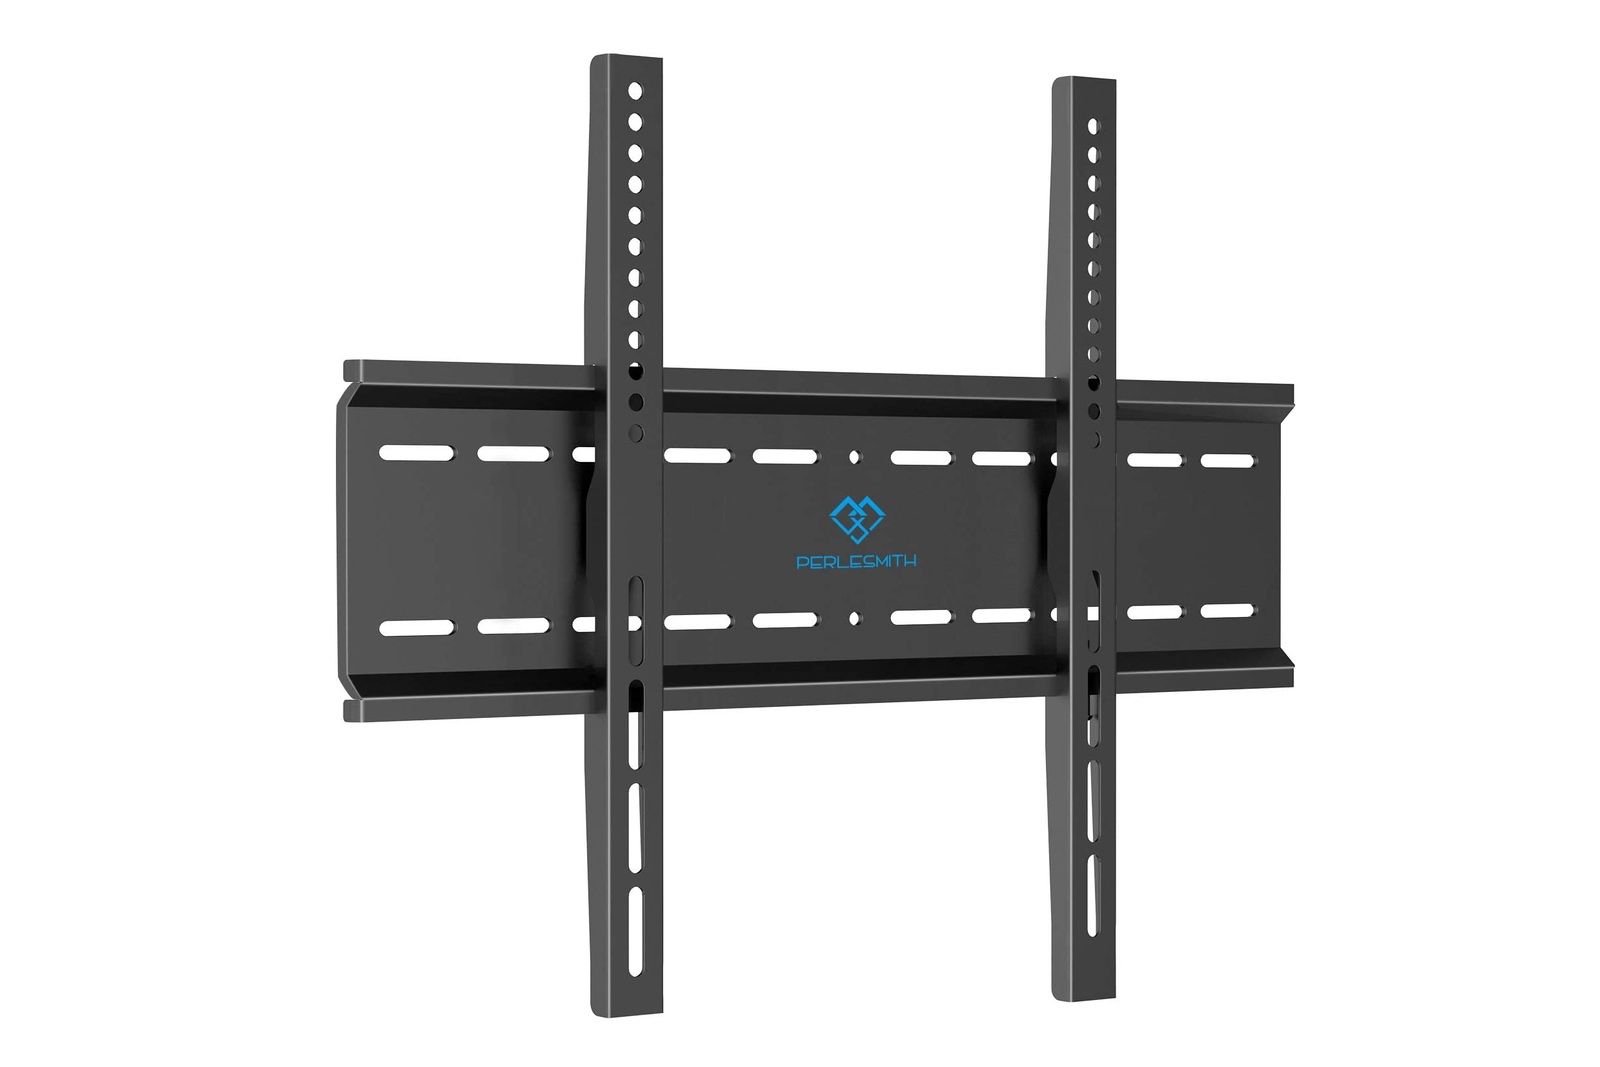 156480 Tv News Buyer S Guide Best Tv Wall Mounts 2021 Excellent Low Profile Brackets To Get Achieve A Flush Flat Screen Image5 Shiv3f1t9c 